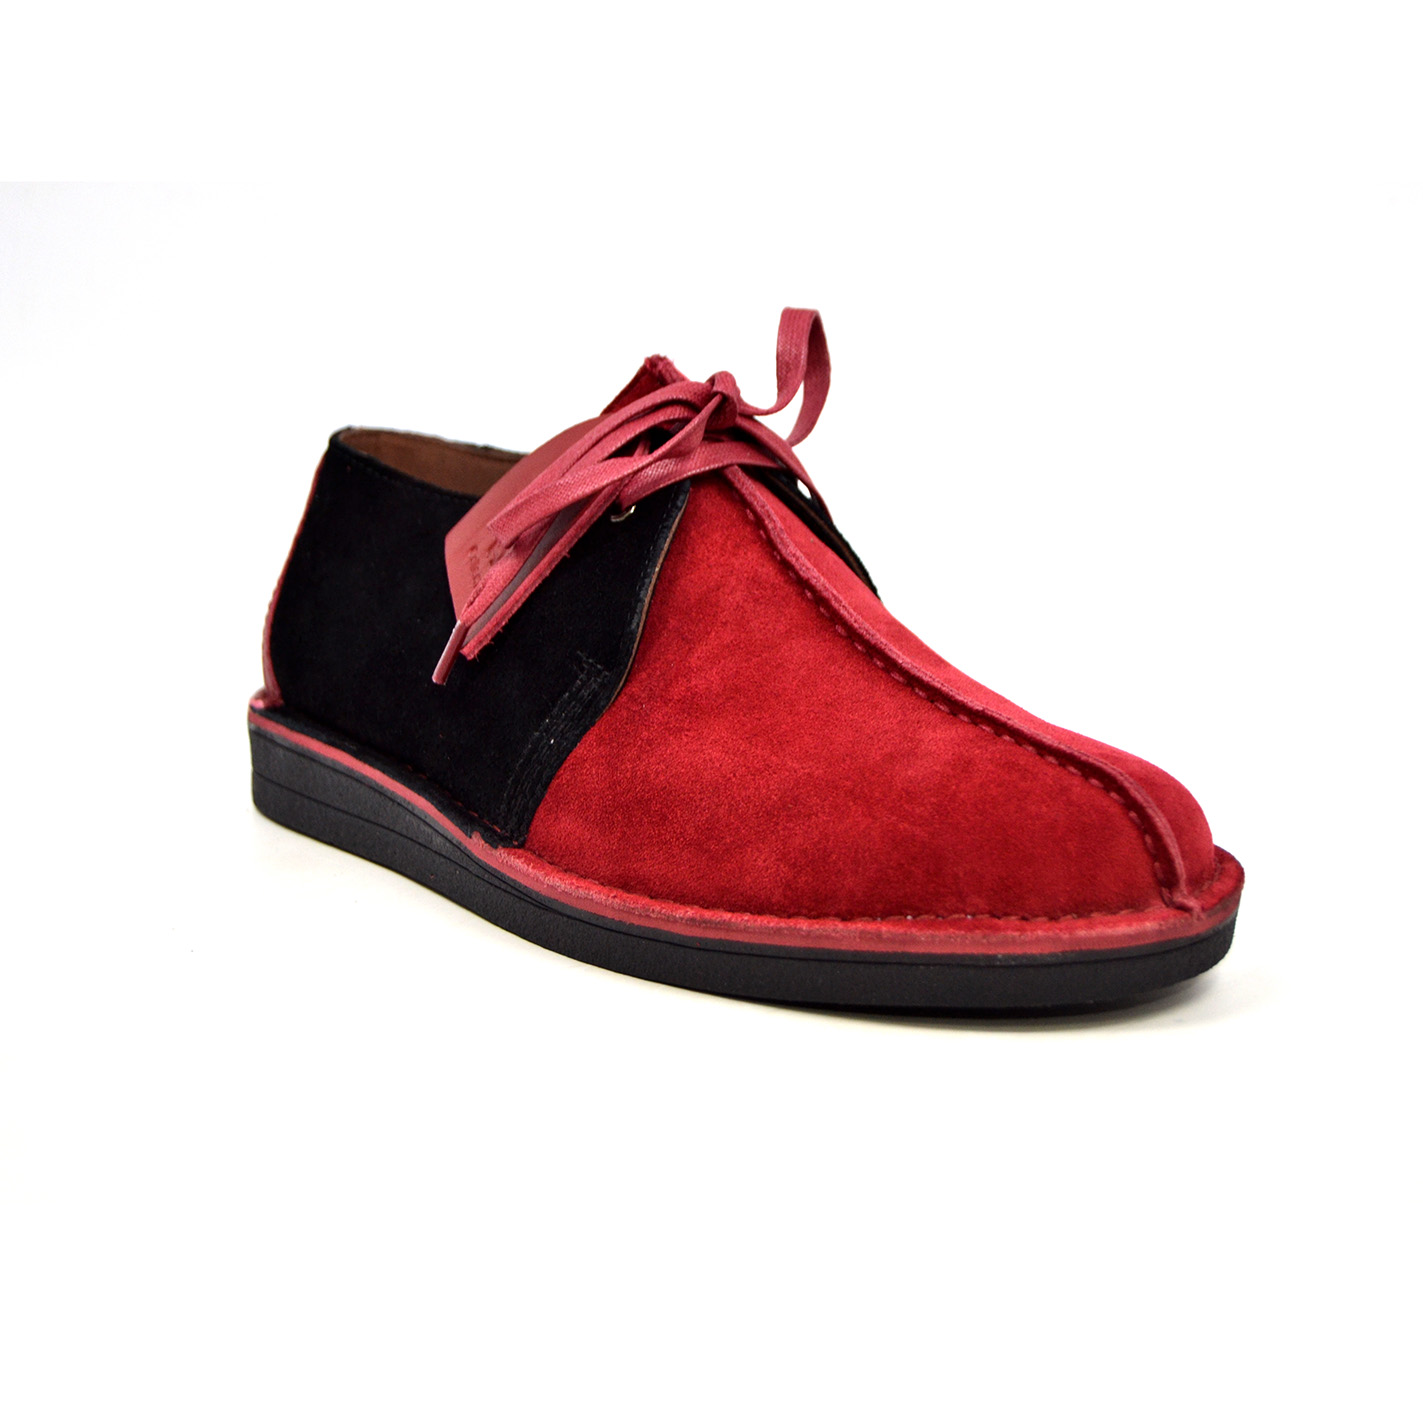 British Collection Kingston, Burgundy Leather and Suede [6391-3] - $99. ...